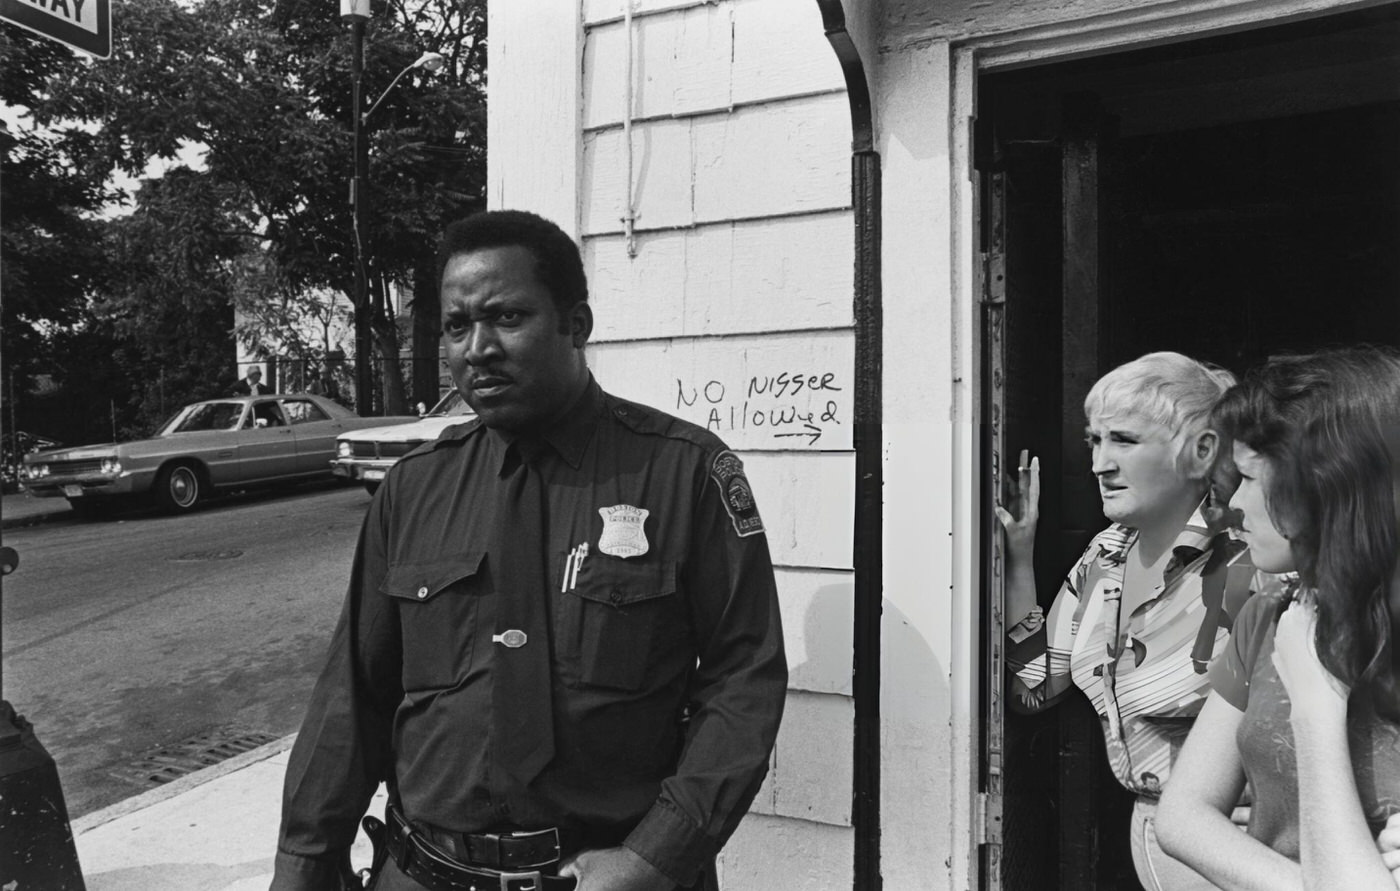 A police officer and two women in a doorway beside racist graffiti, Boston, 1975.